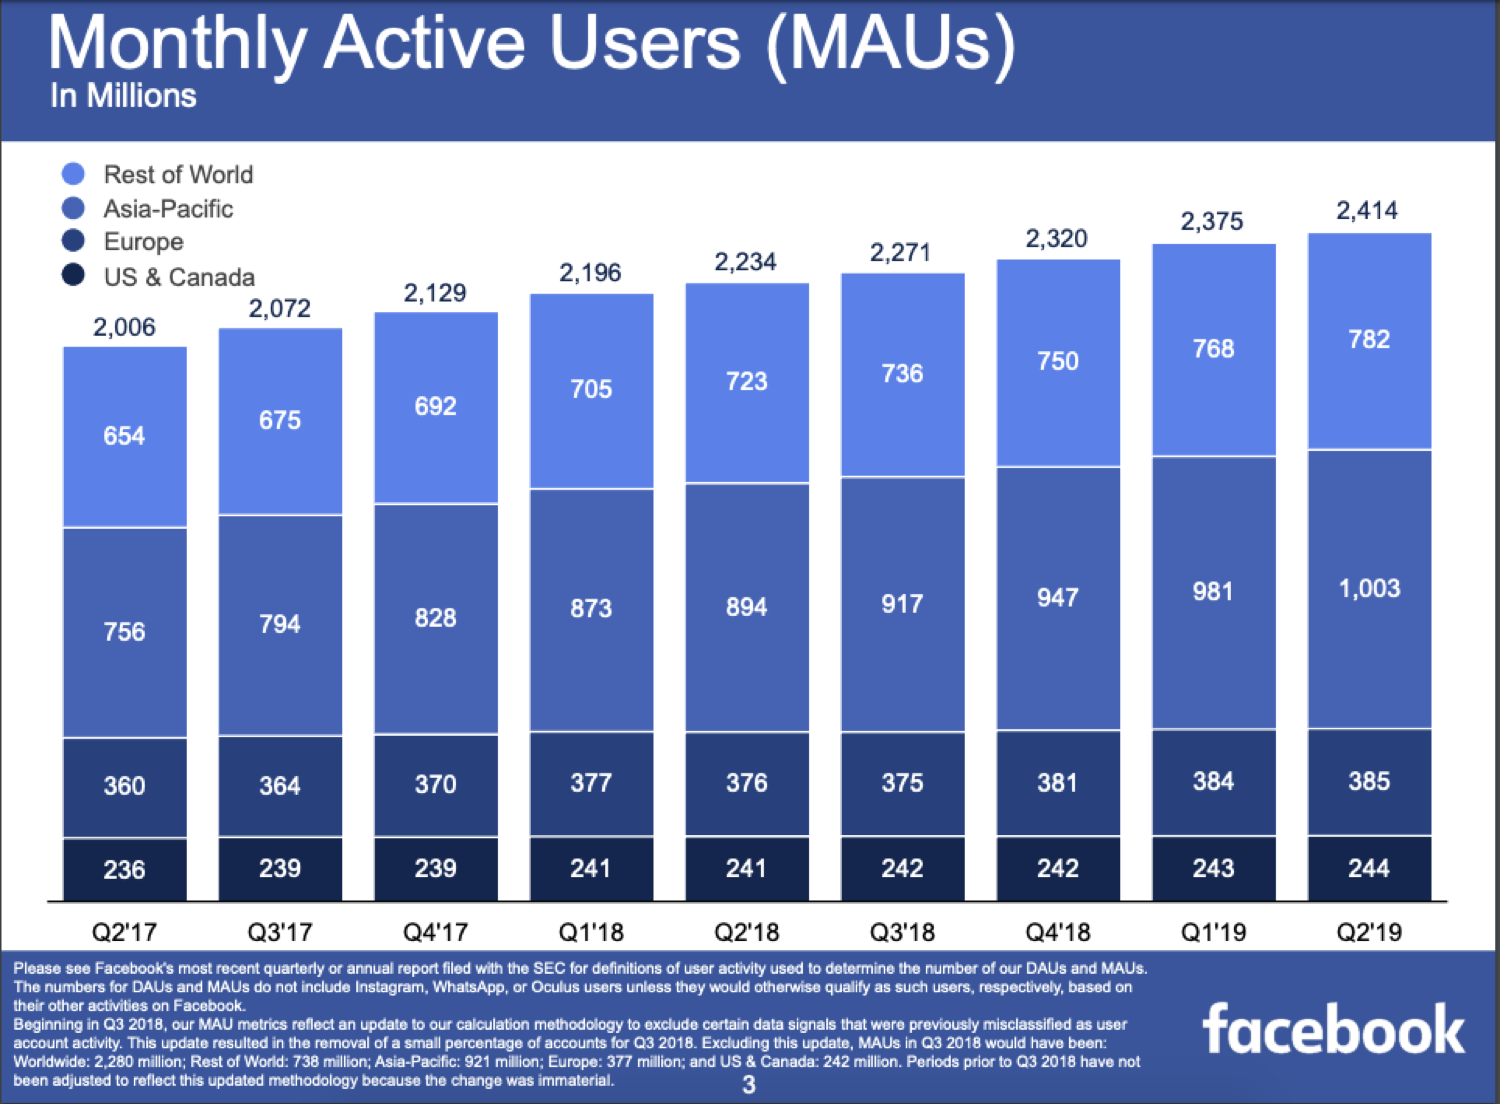 Monthly active users on Facebook